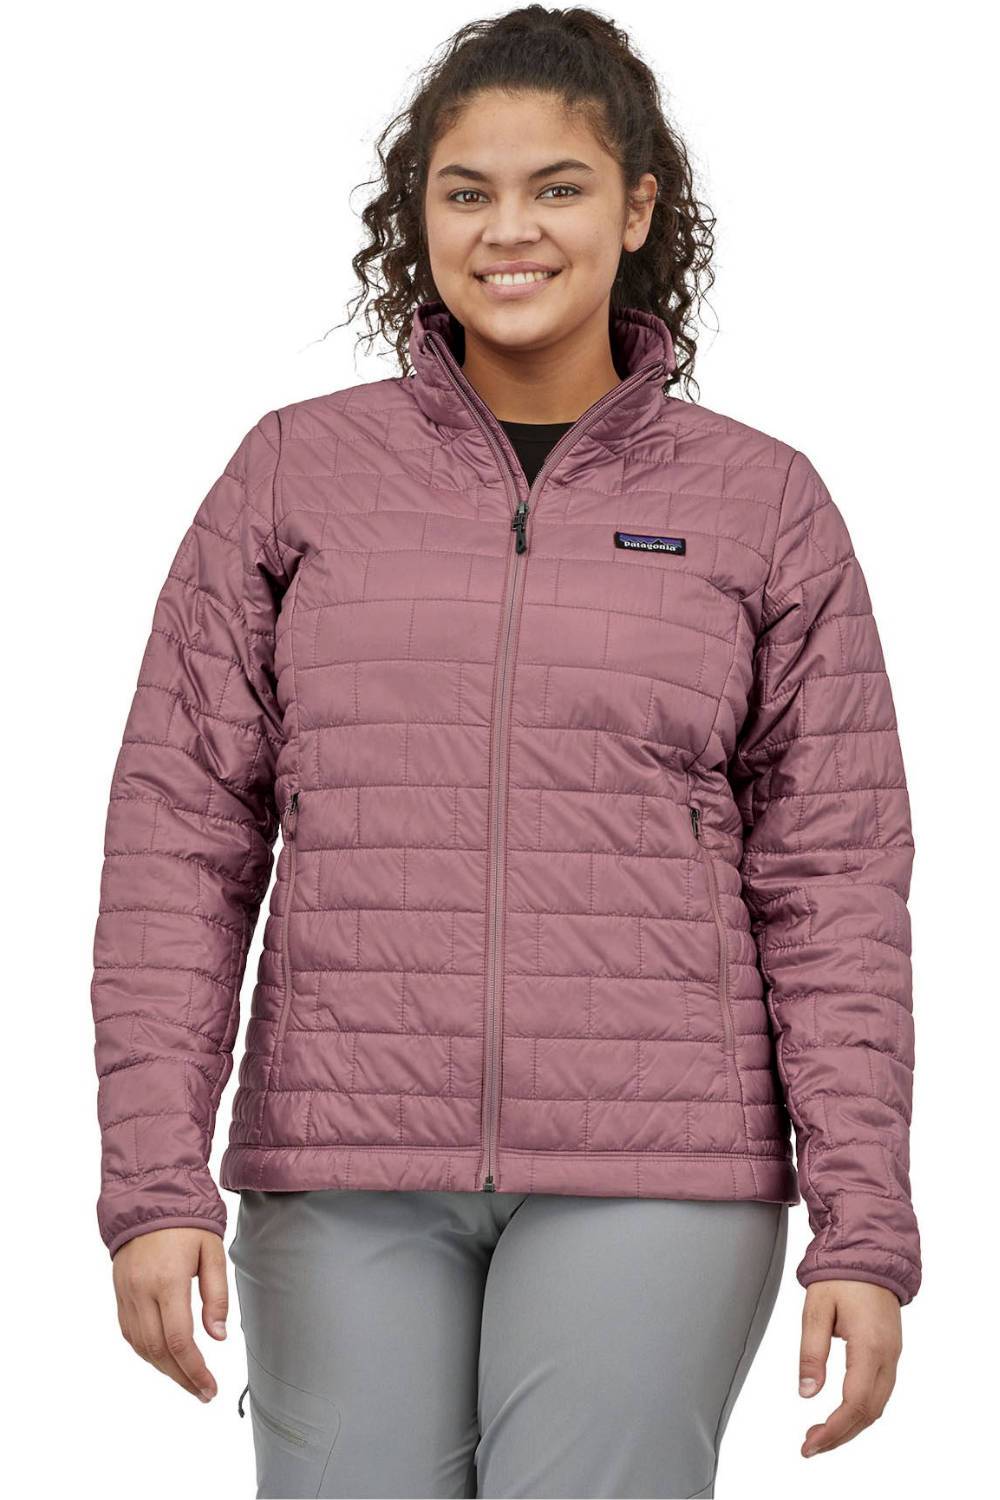 patagonia recycled puffer jacket